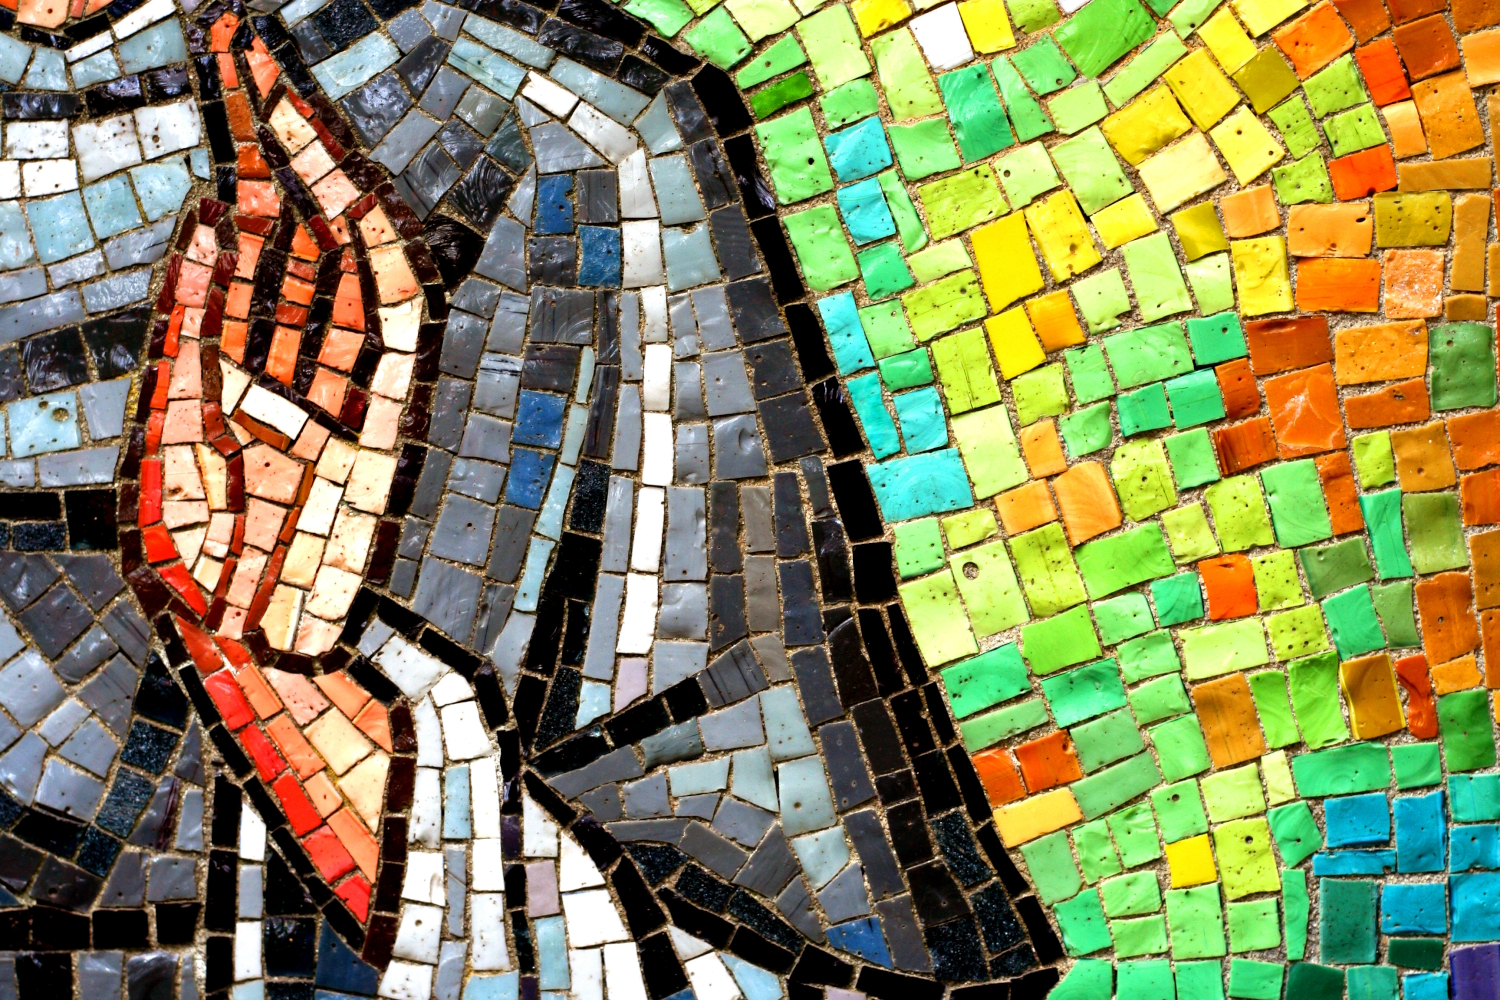 Part of a stained glass image showing a mosaic of a hand giving a blessing